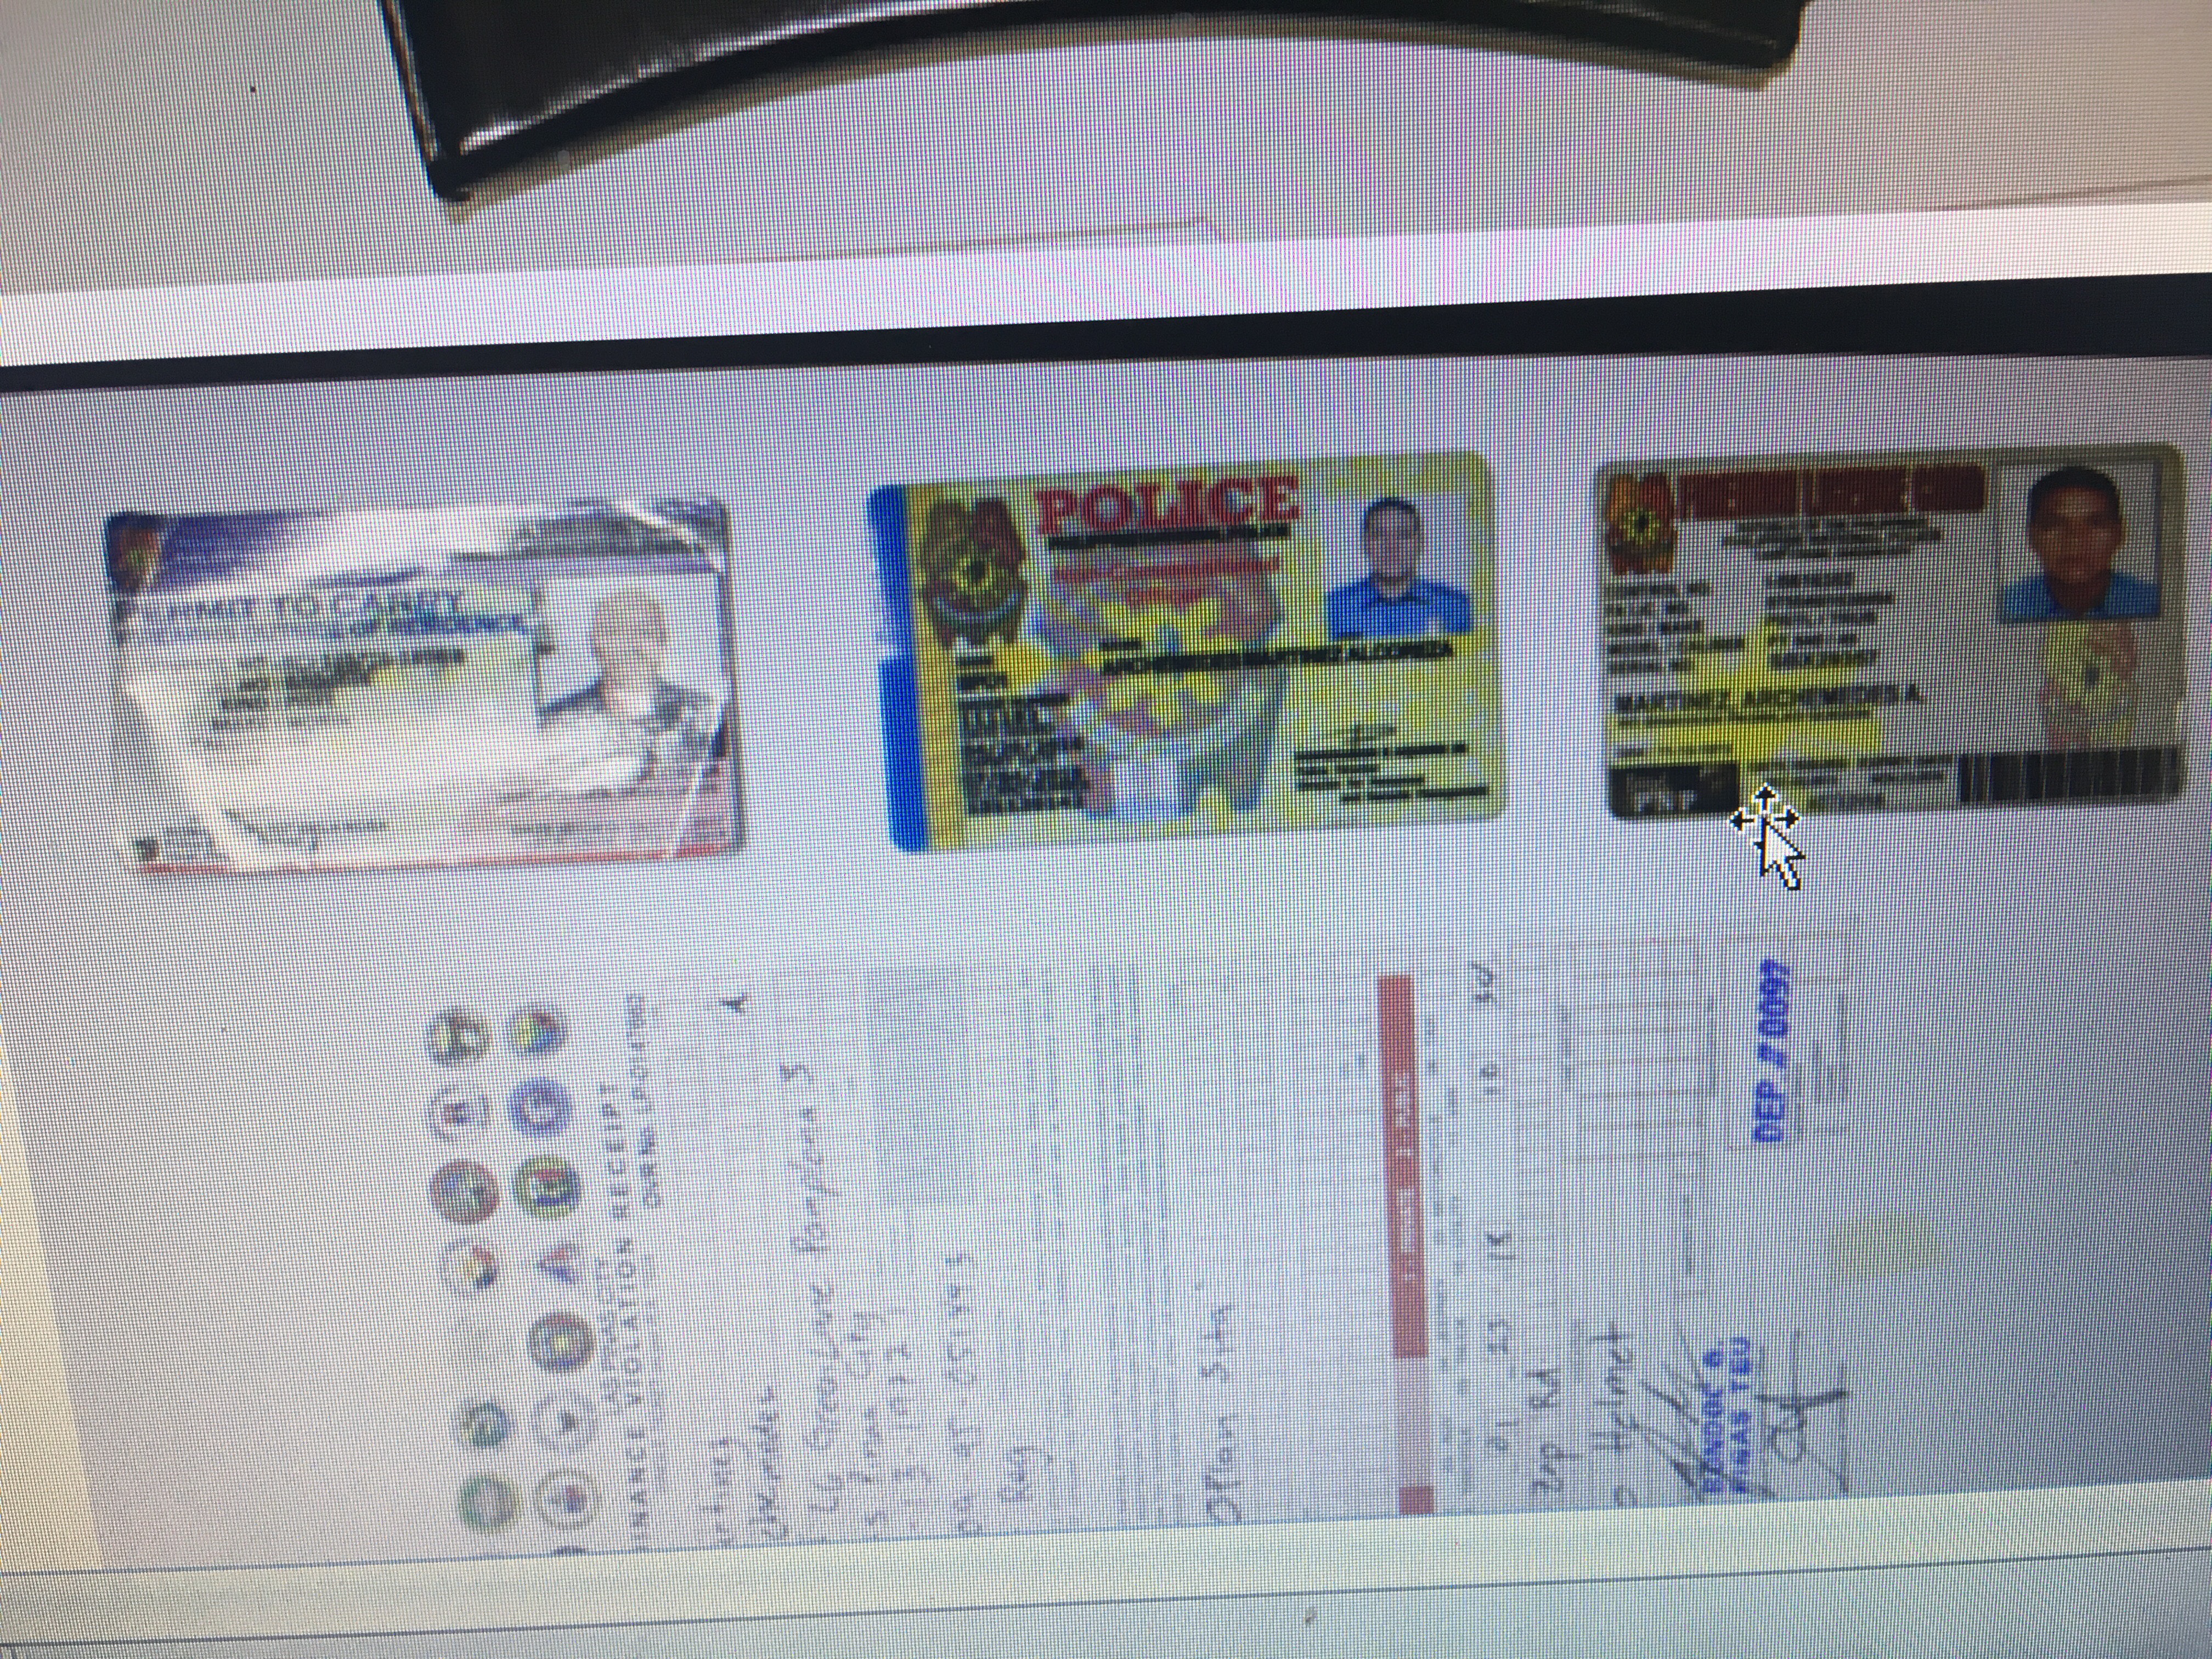 Martinez' police ID cards were found to be fake. PHOTO FROM LAS PIÑAS POLICE